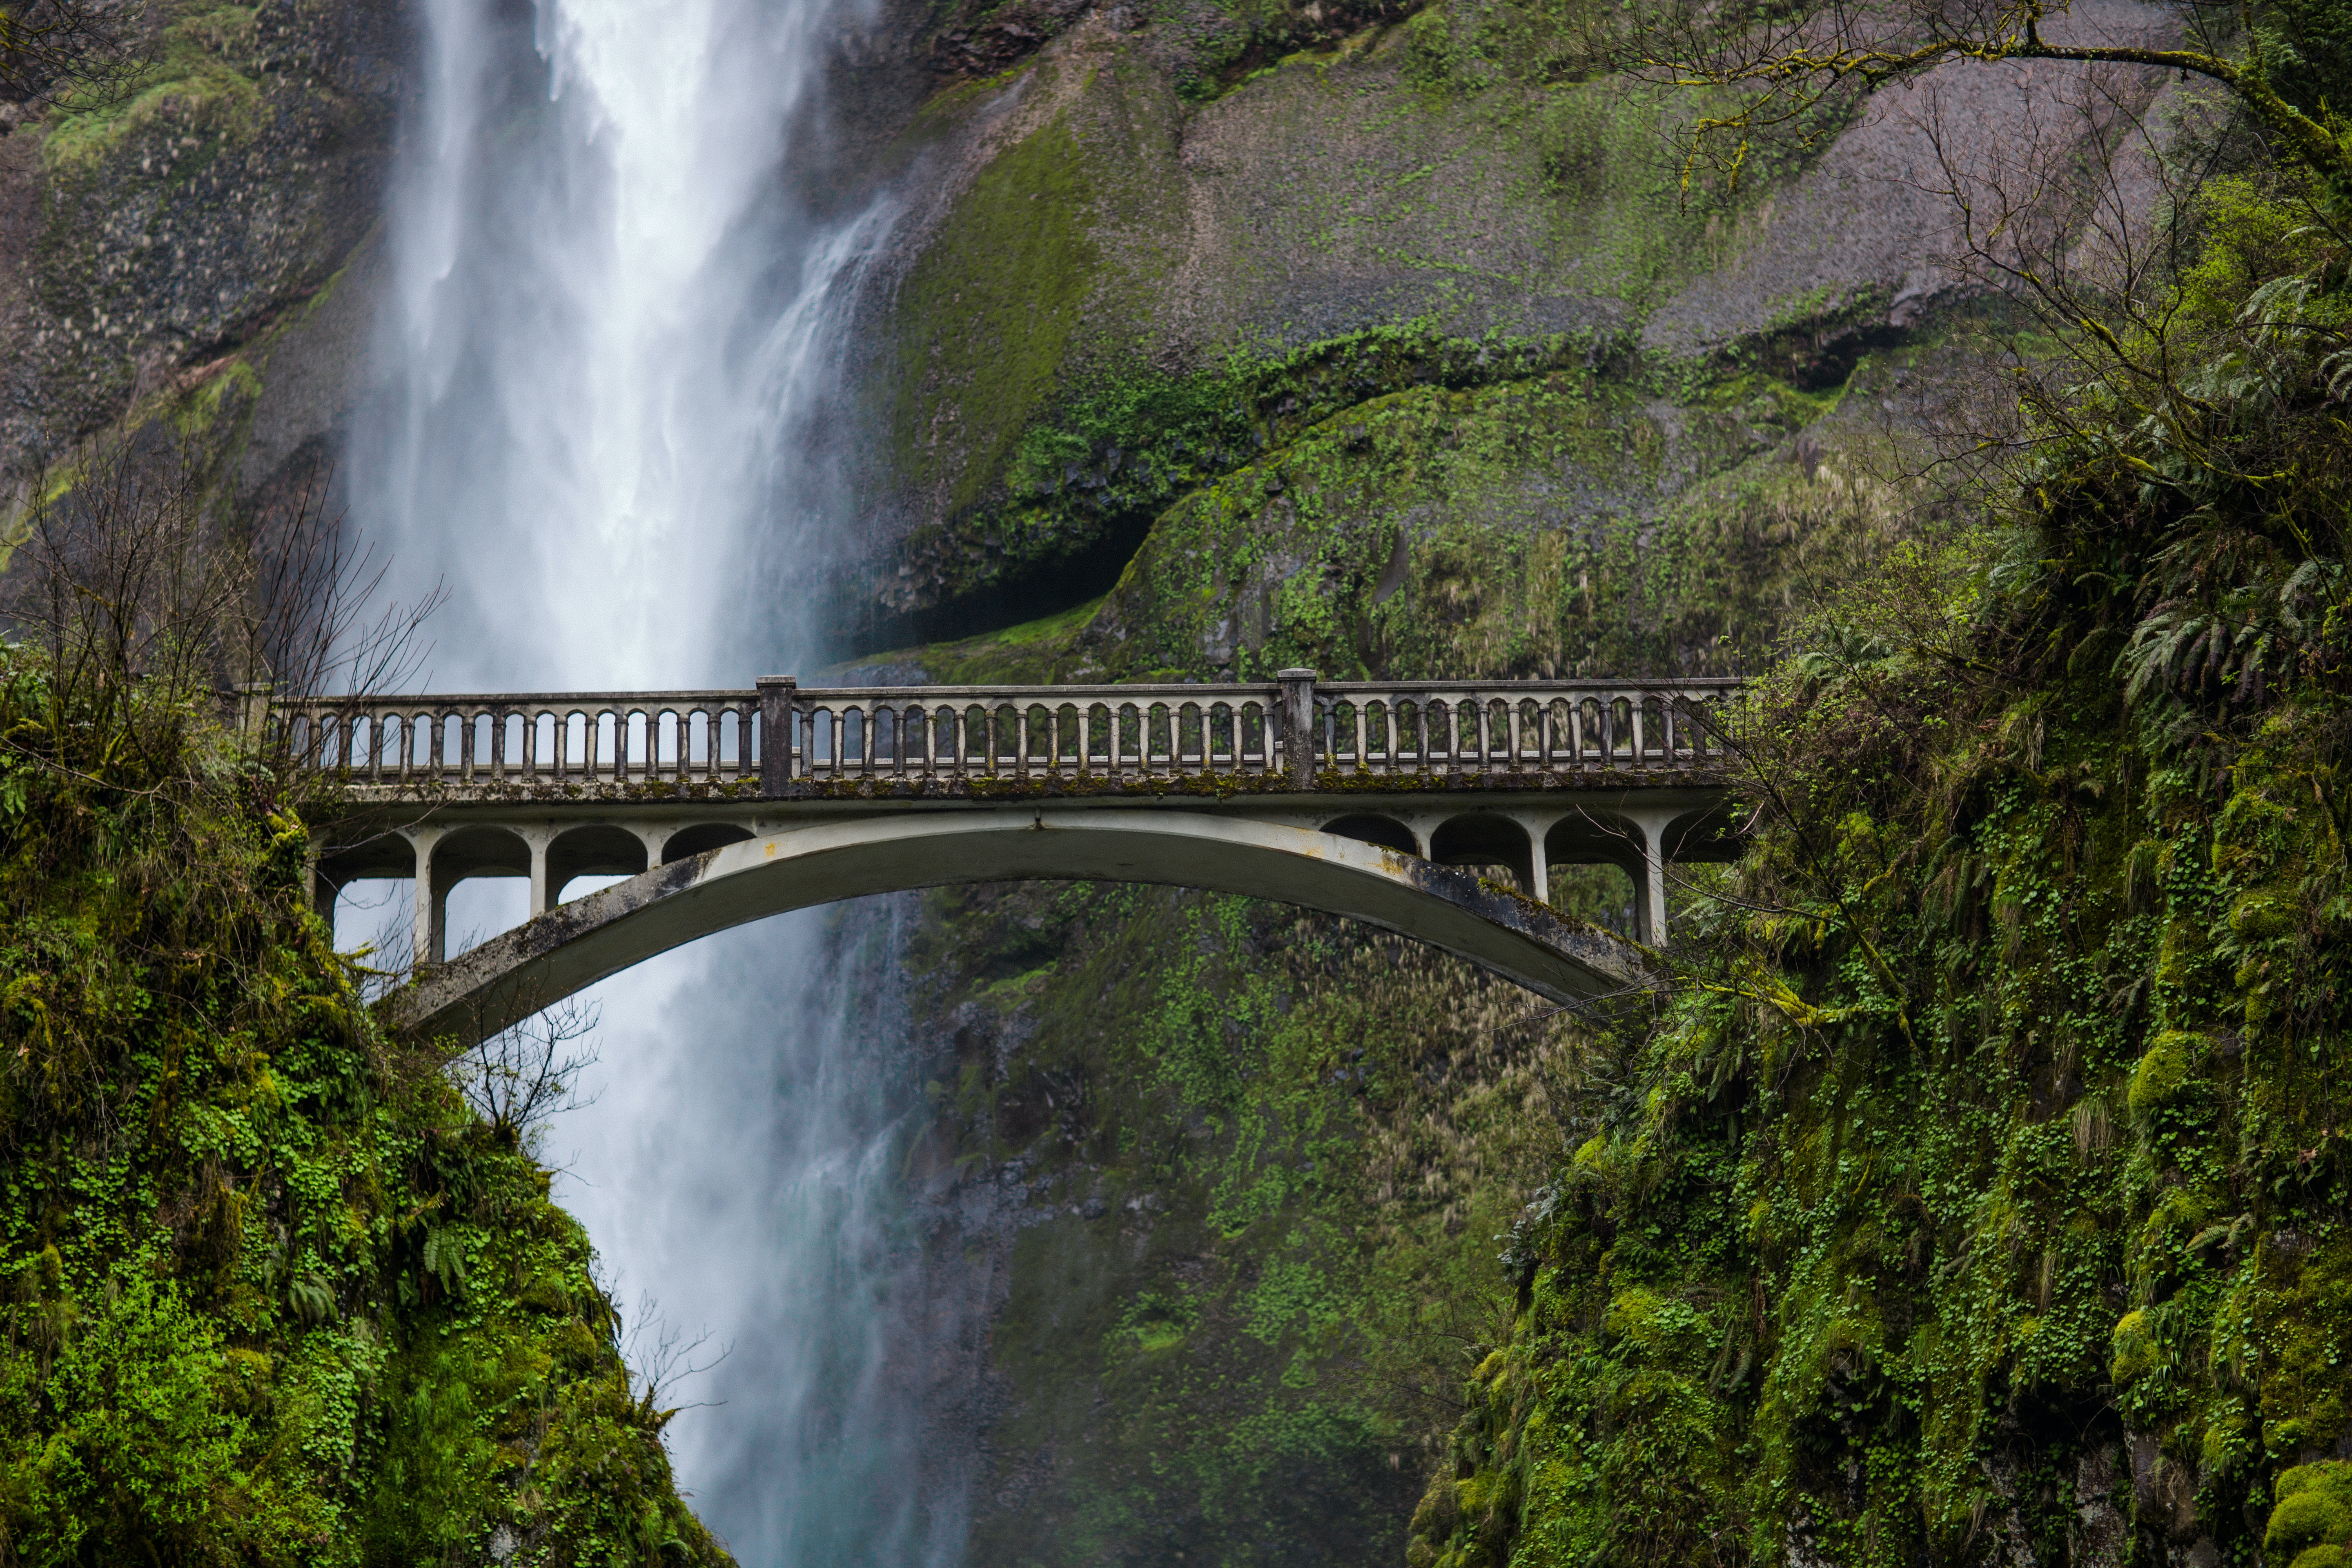 Bridge by waterfalls. Photo by James Forbes on Unsplash